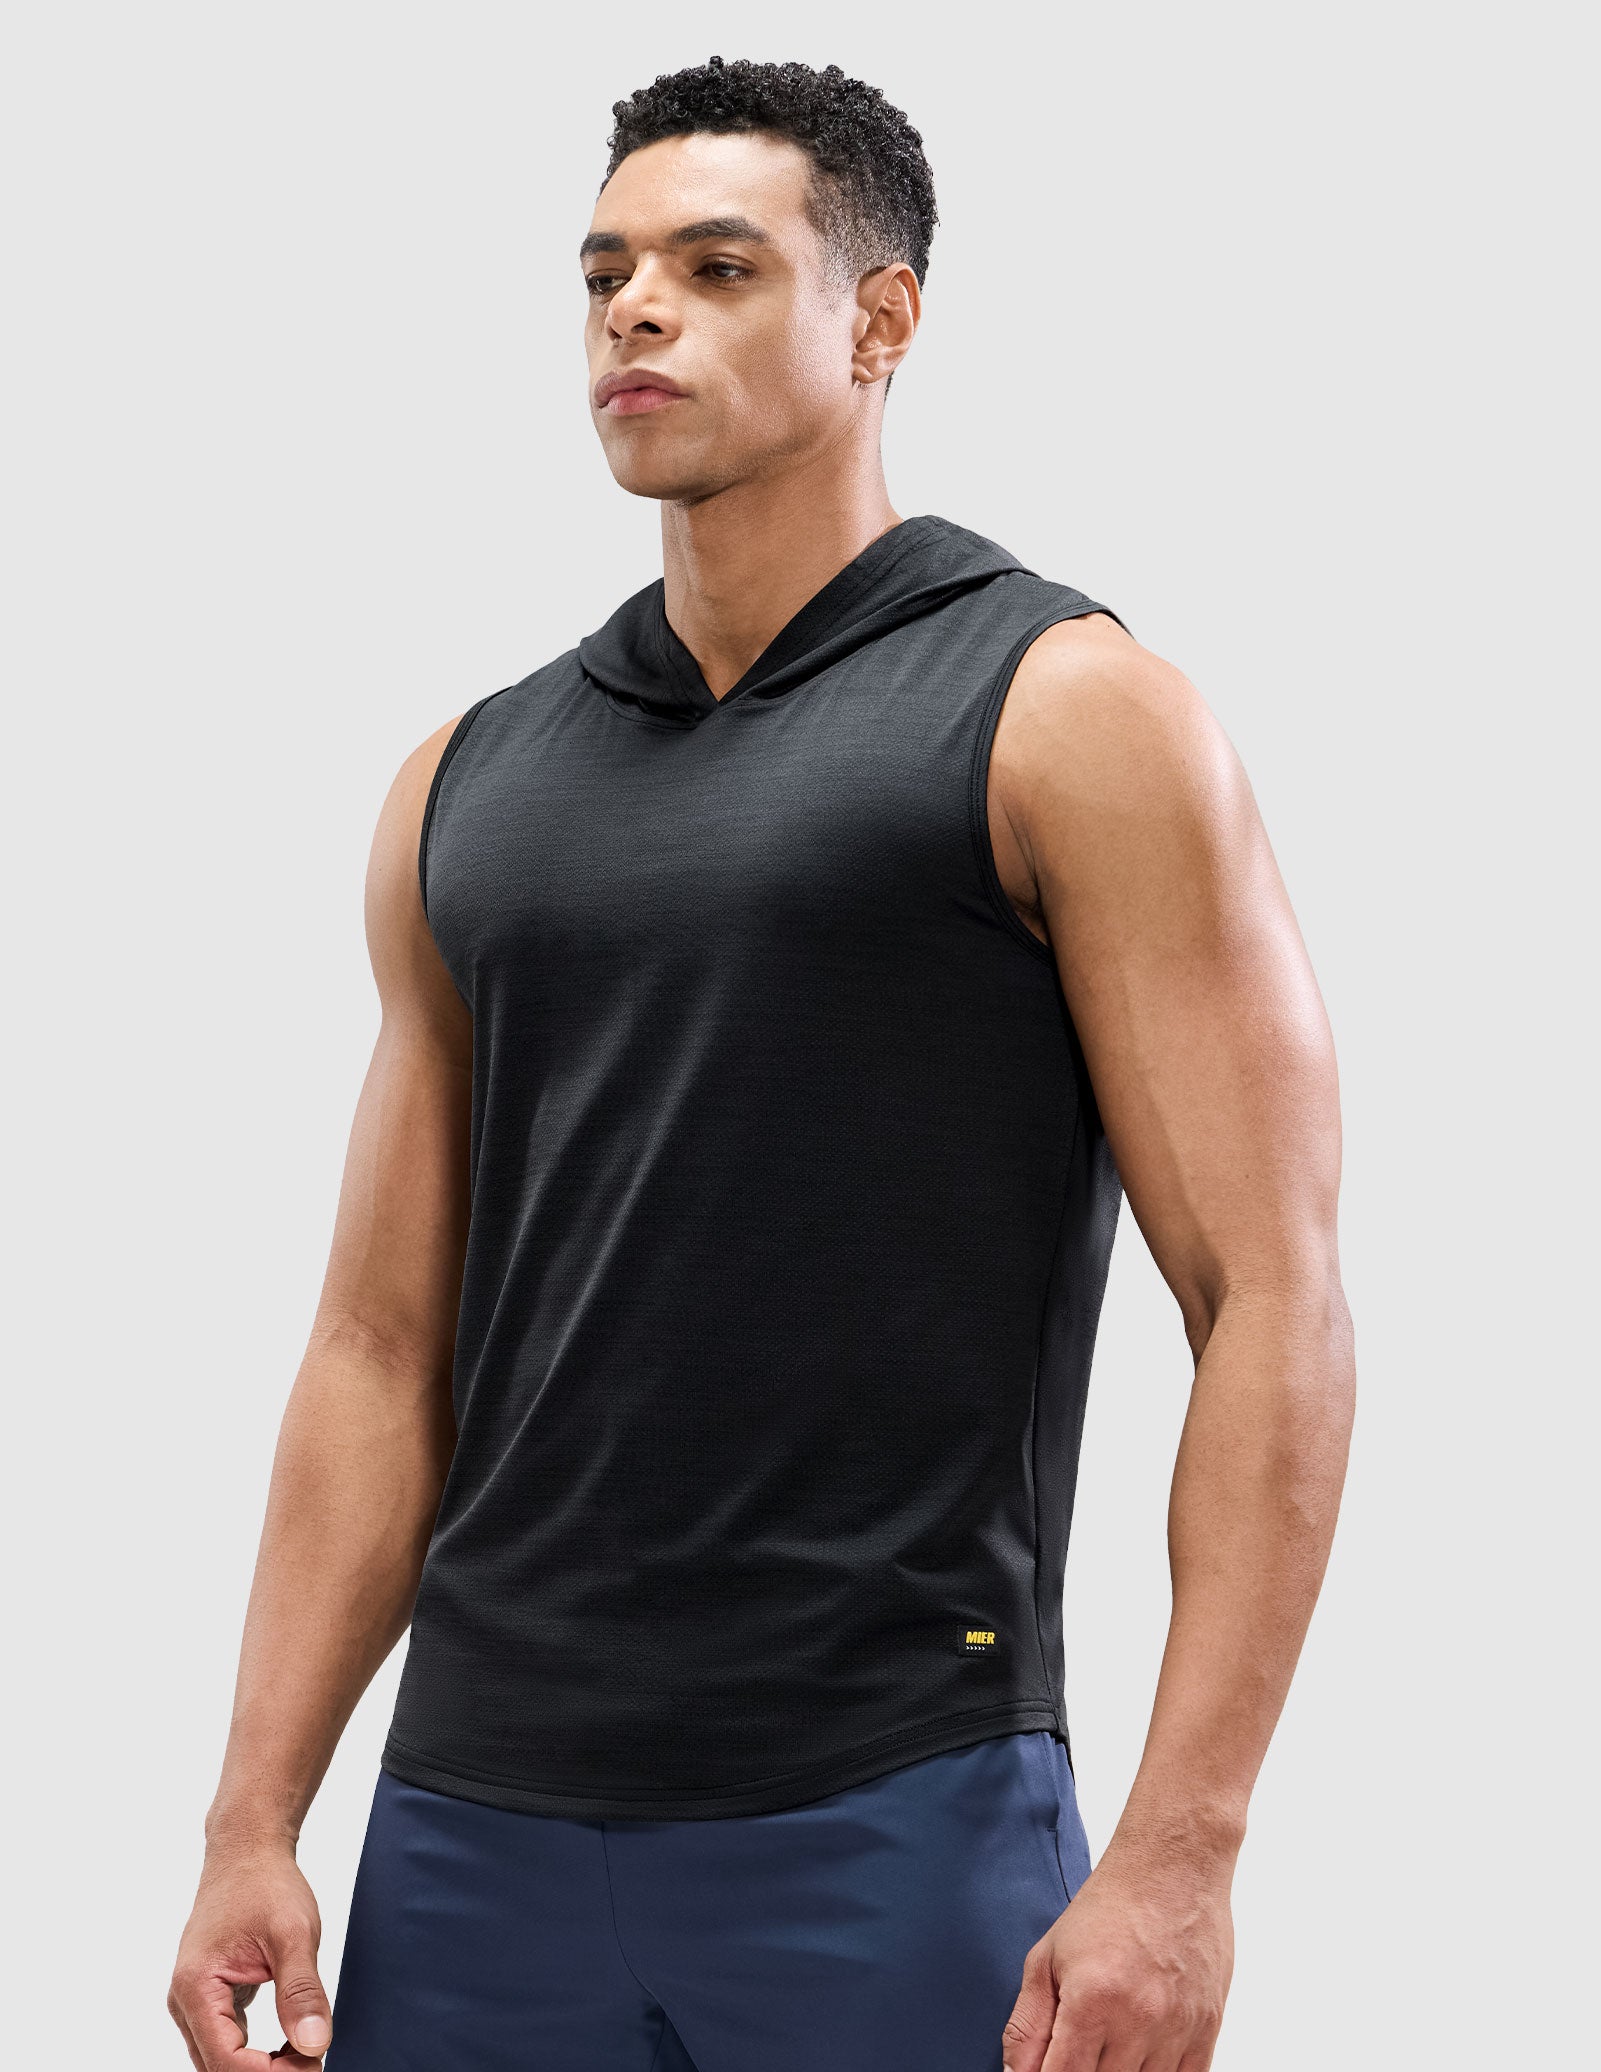 Men's Sleeveless Tank Top with Hood Quick Dry Shirts